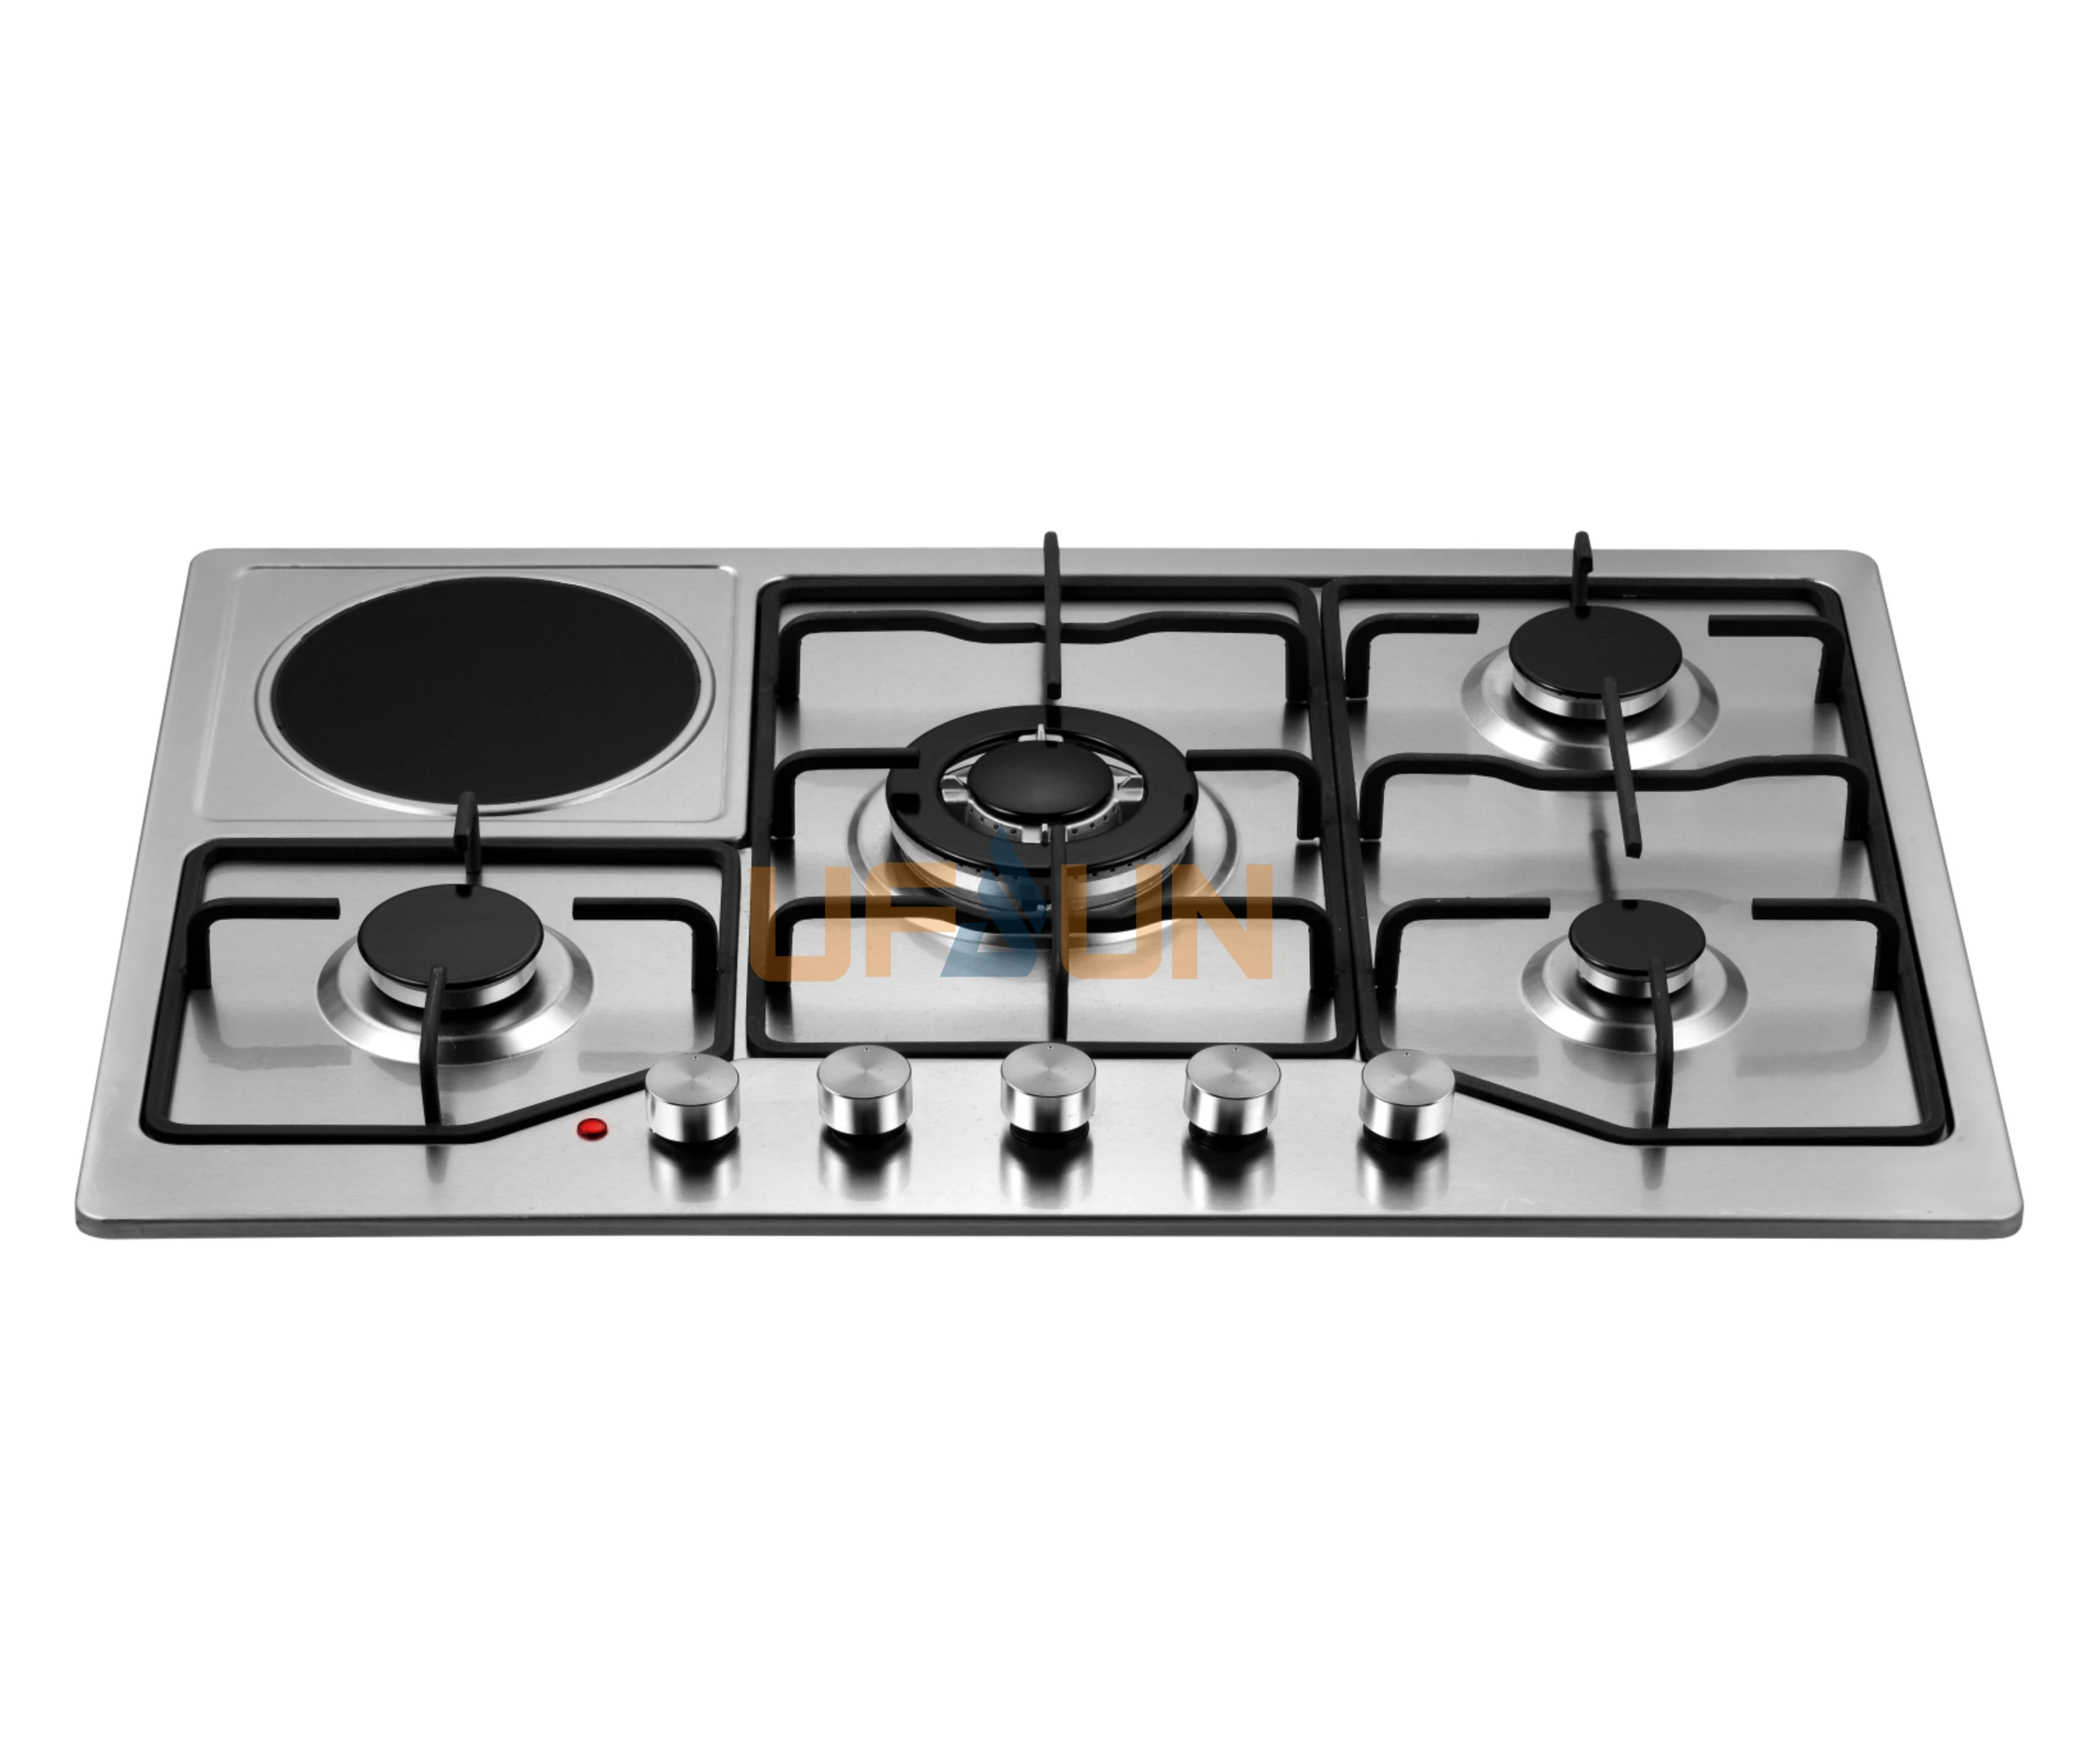 Gas Cooktops Type infrared gas hob/gas cooker/gas cooktop